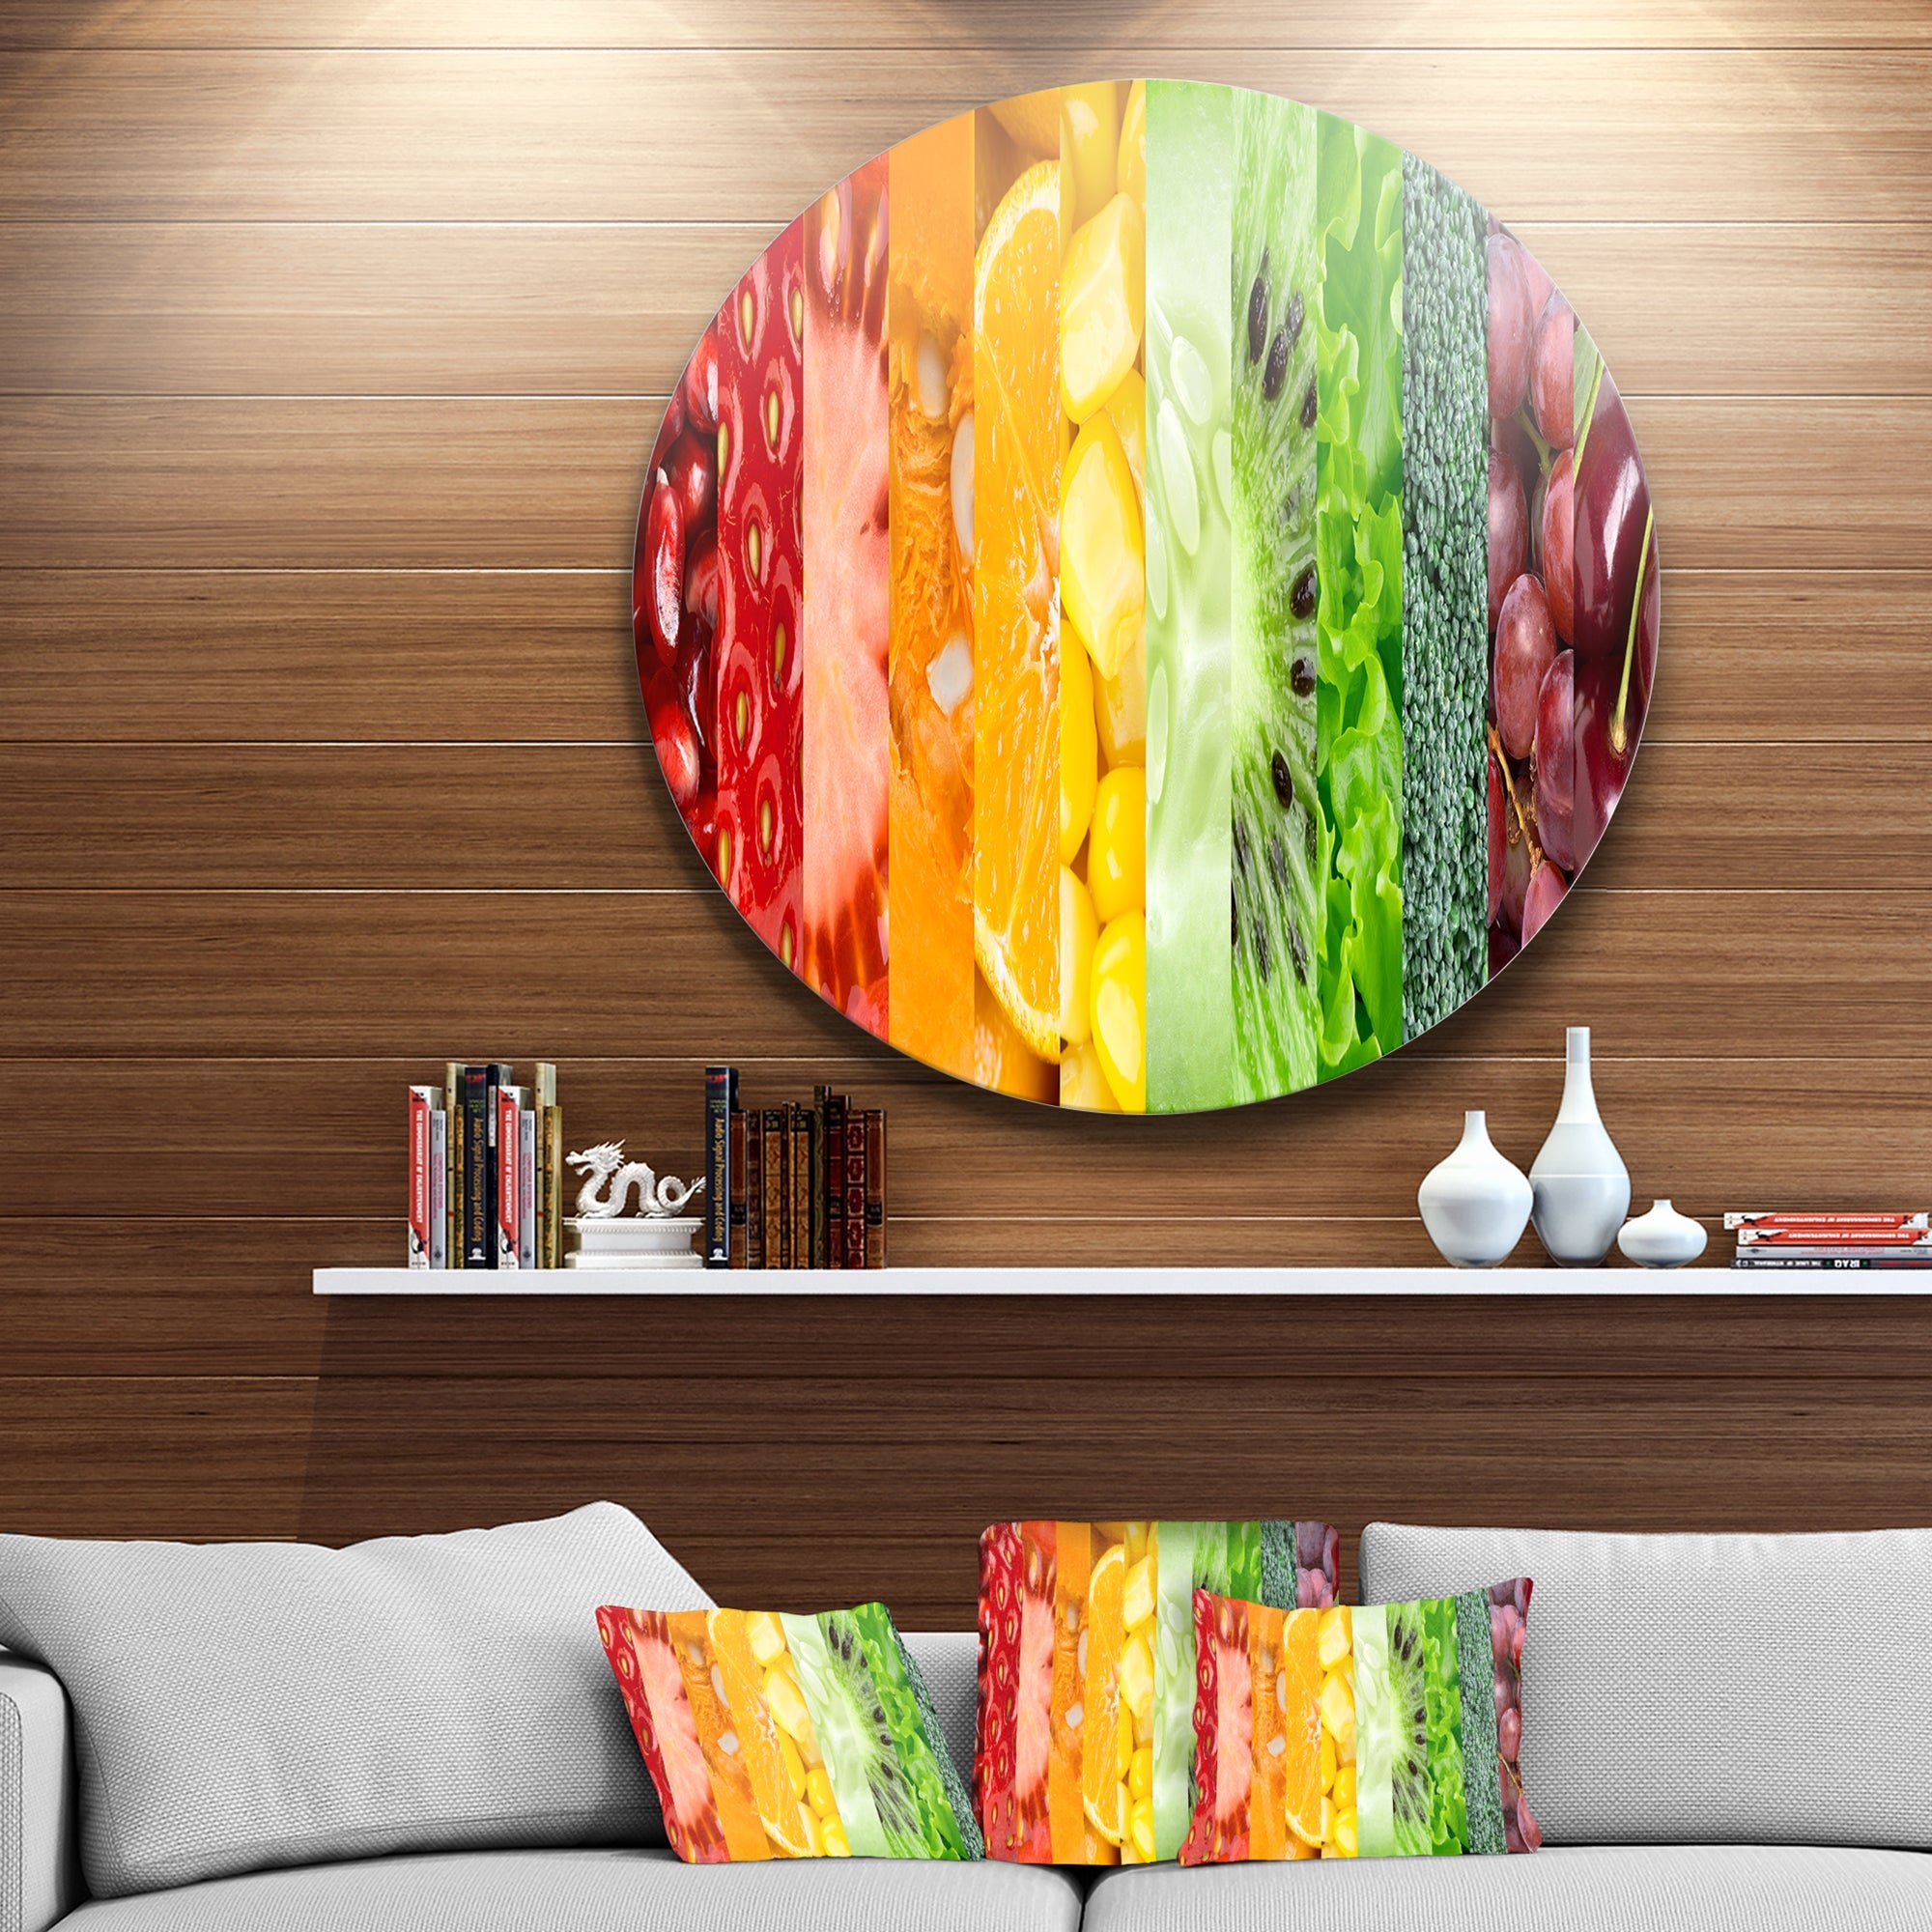 Fruits Berries and Vegie Collage Floral Circle Metal Wall Art